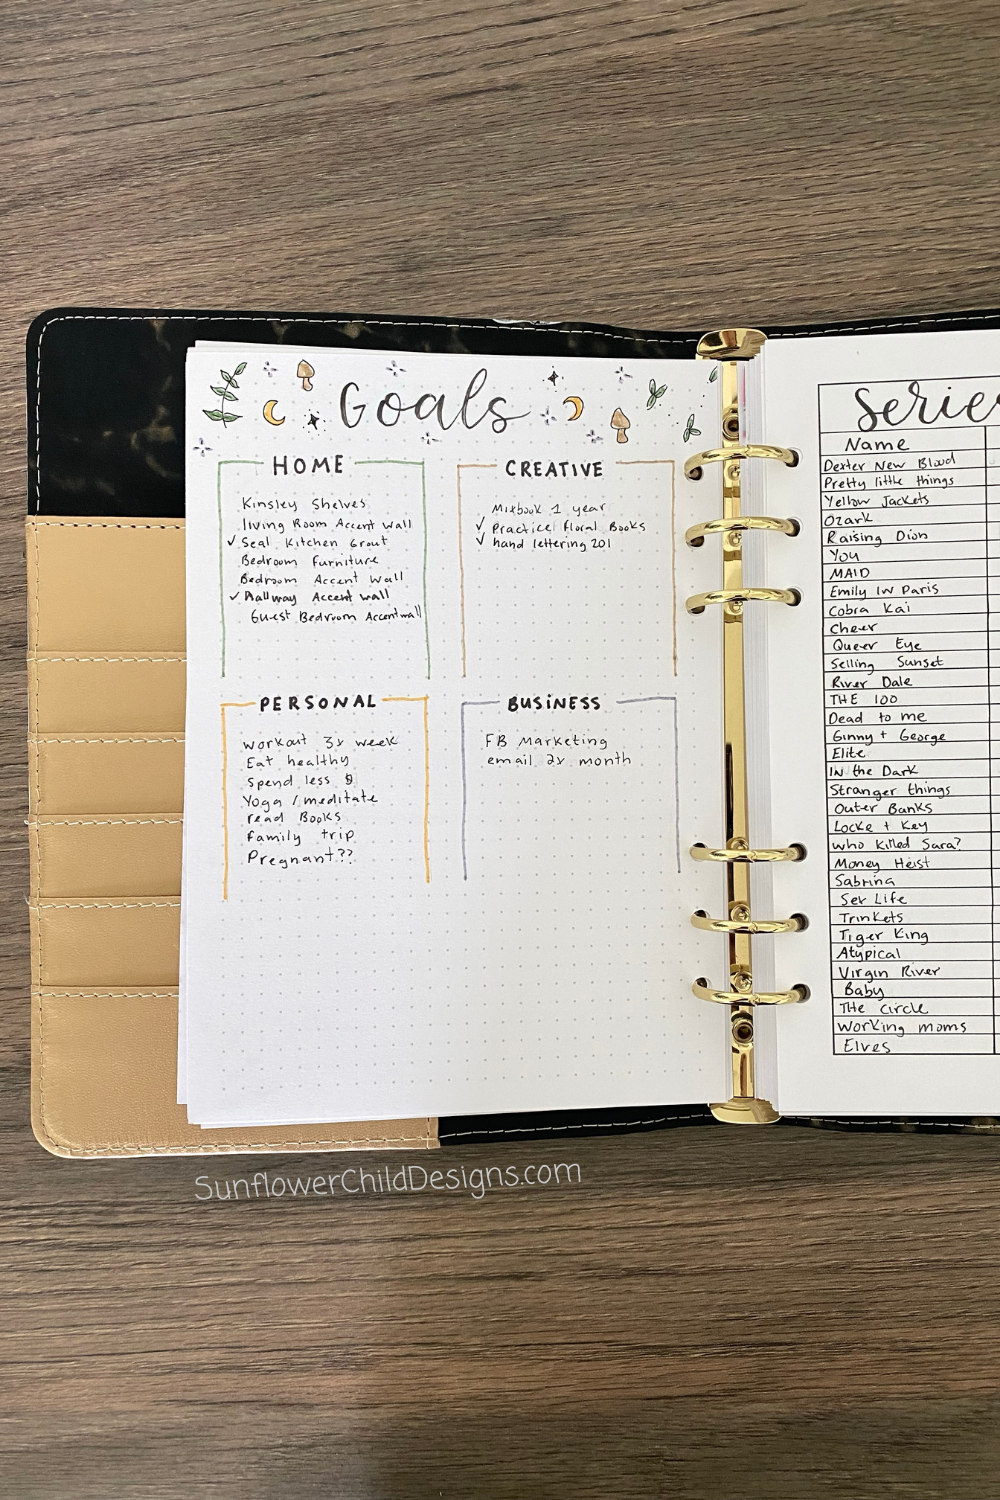 get creative with bullet journaling, by LD - yooou!